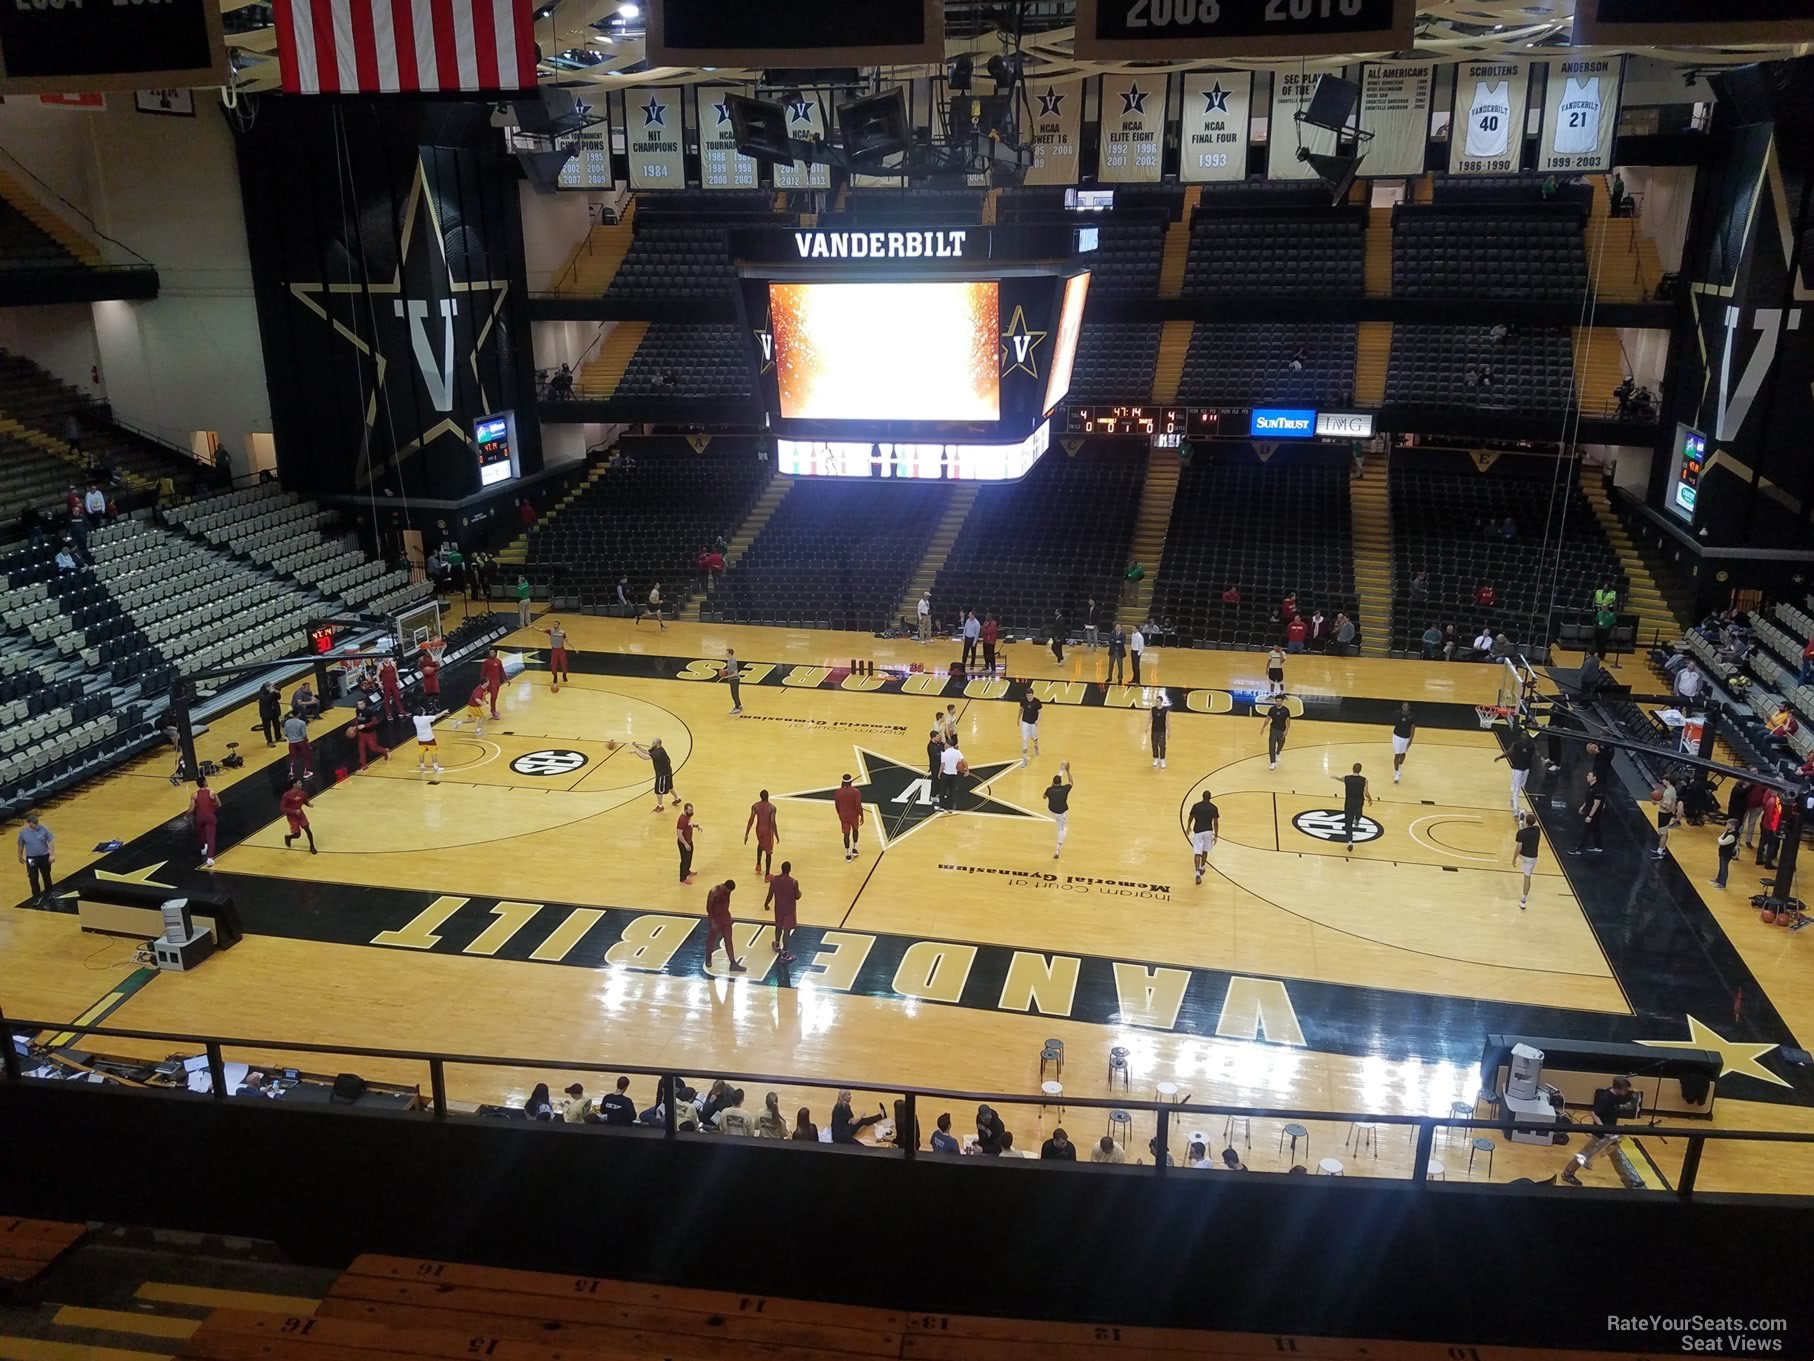 section 3h, row 7 seat view  - memorial gymnasium